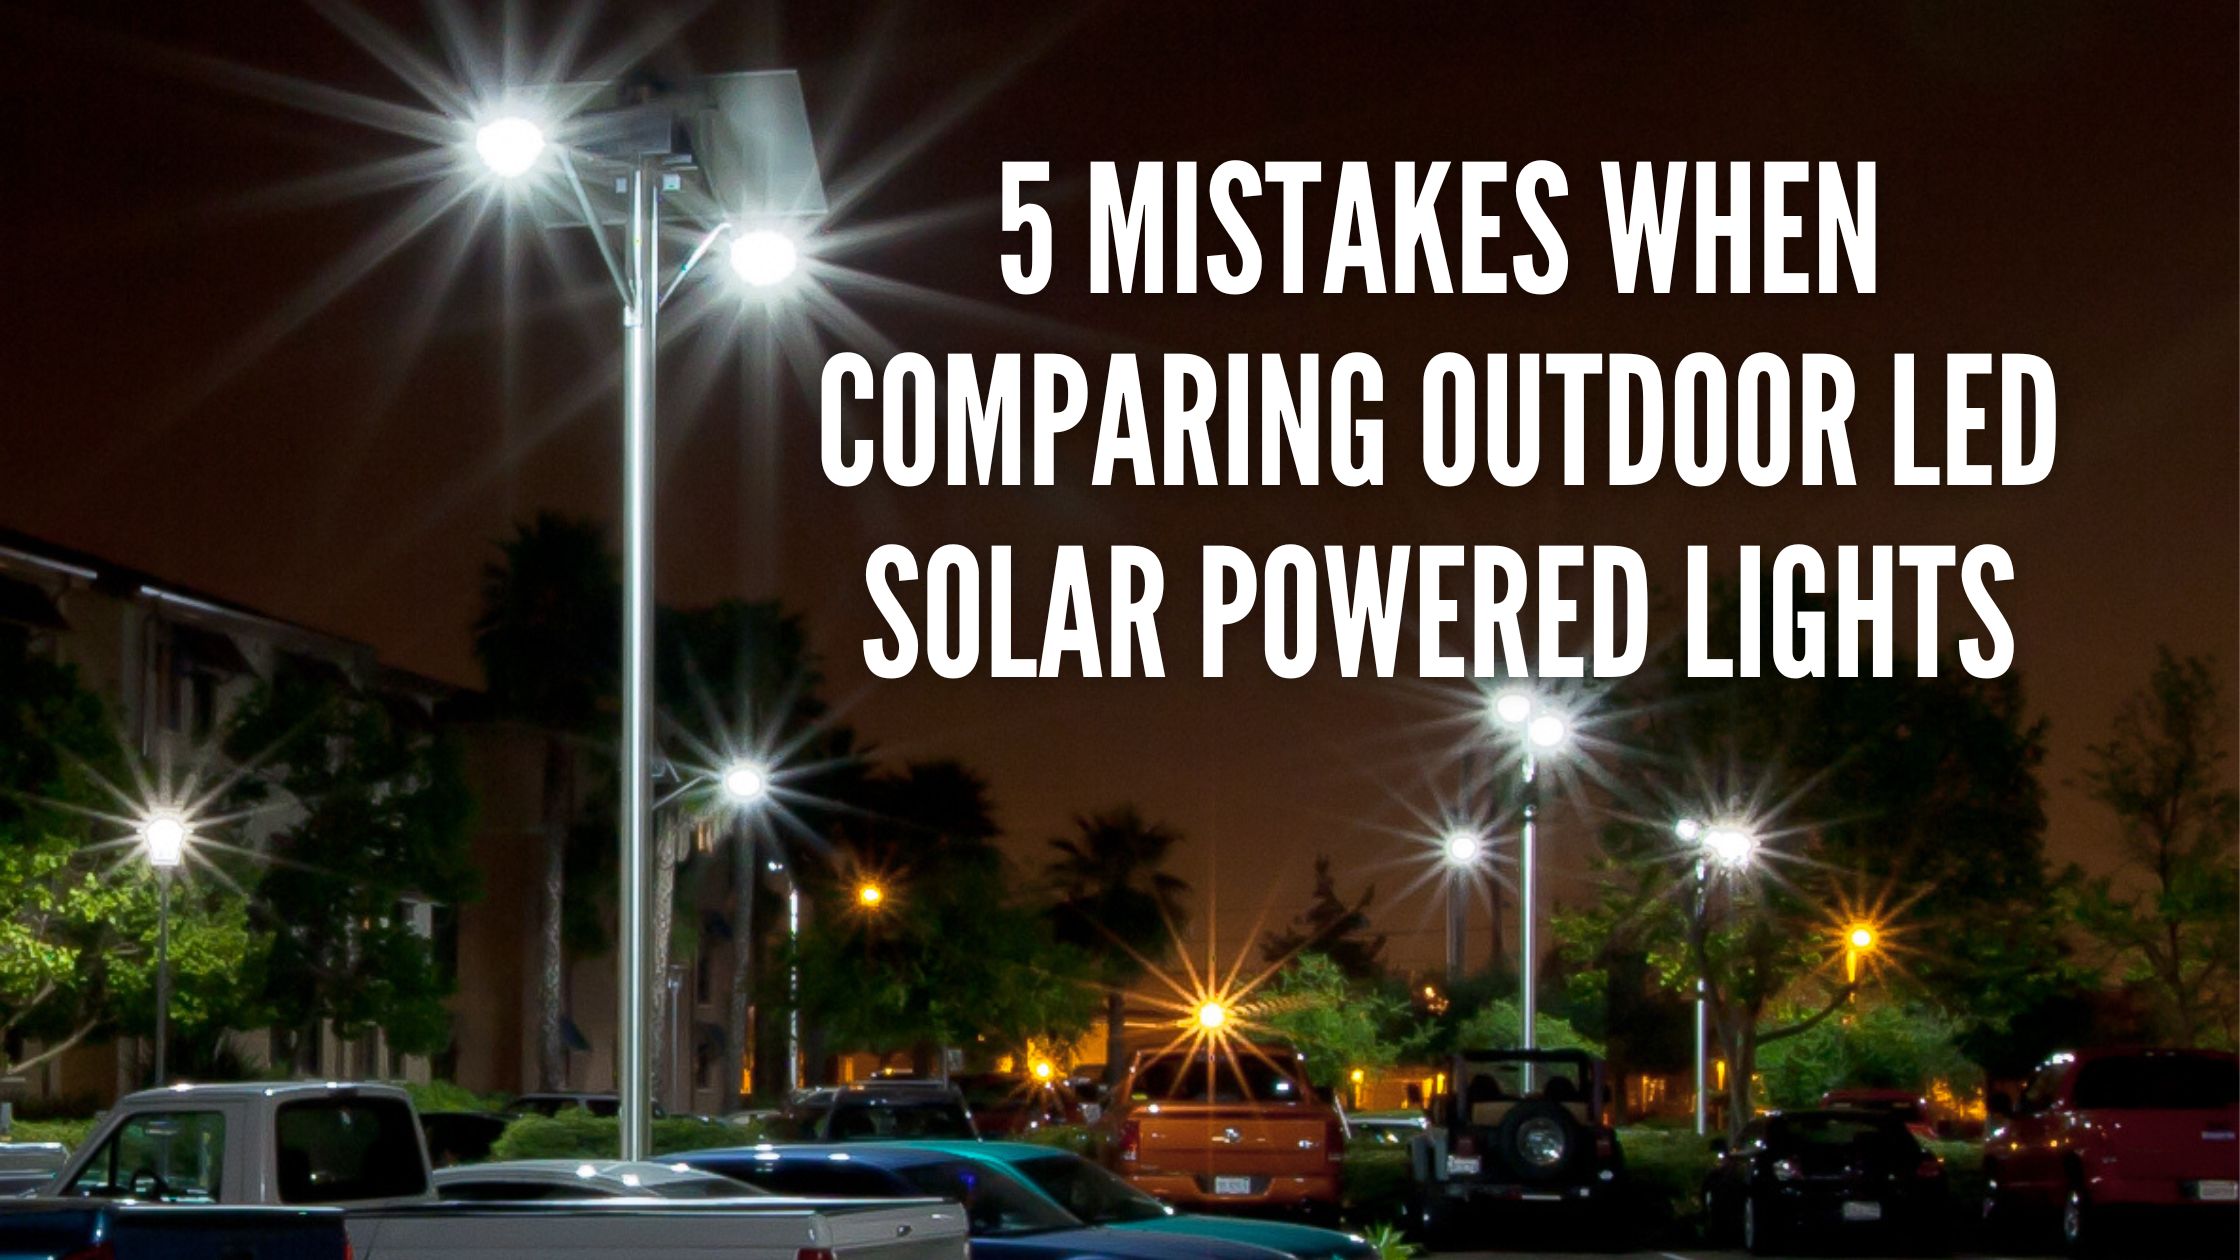 5 Mistakes when Comparing Outdoor LED Solar Powered Lights